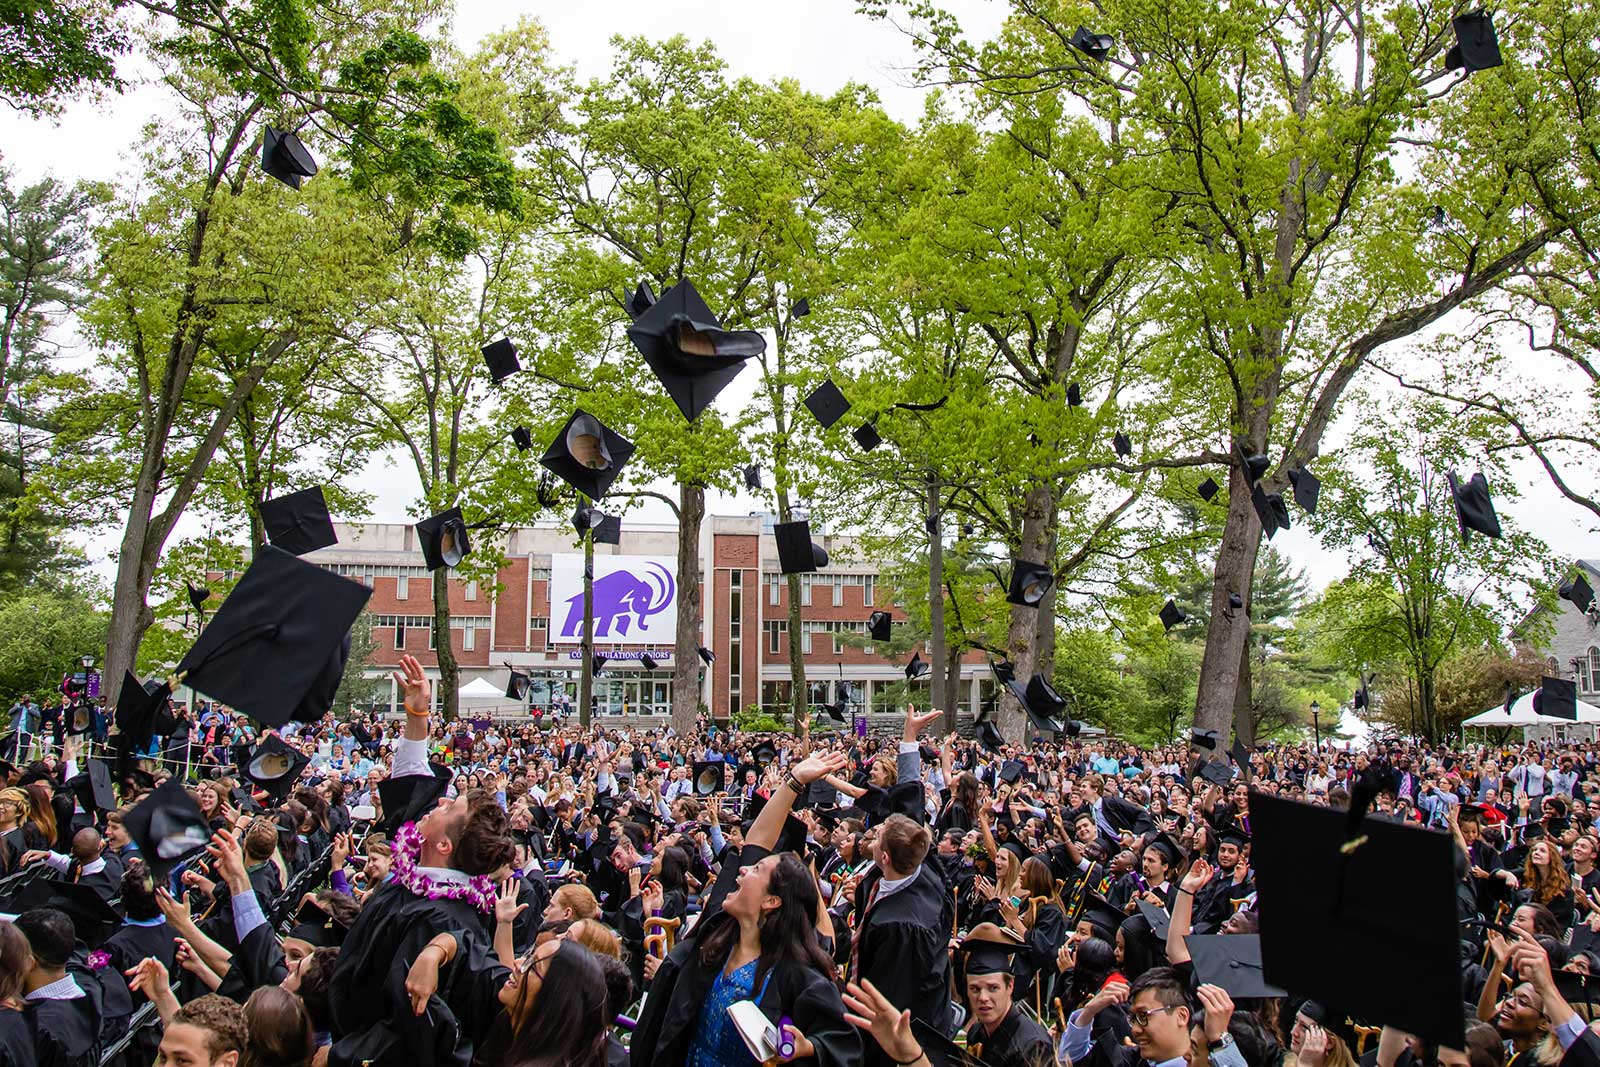 Graduates tossing their caps in the air in celebration